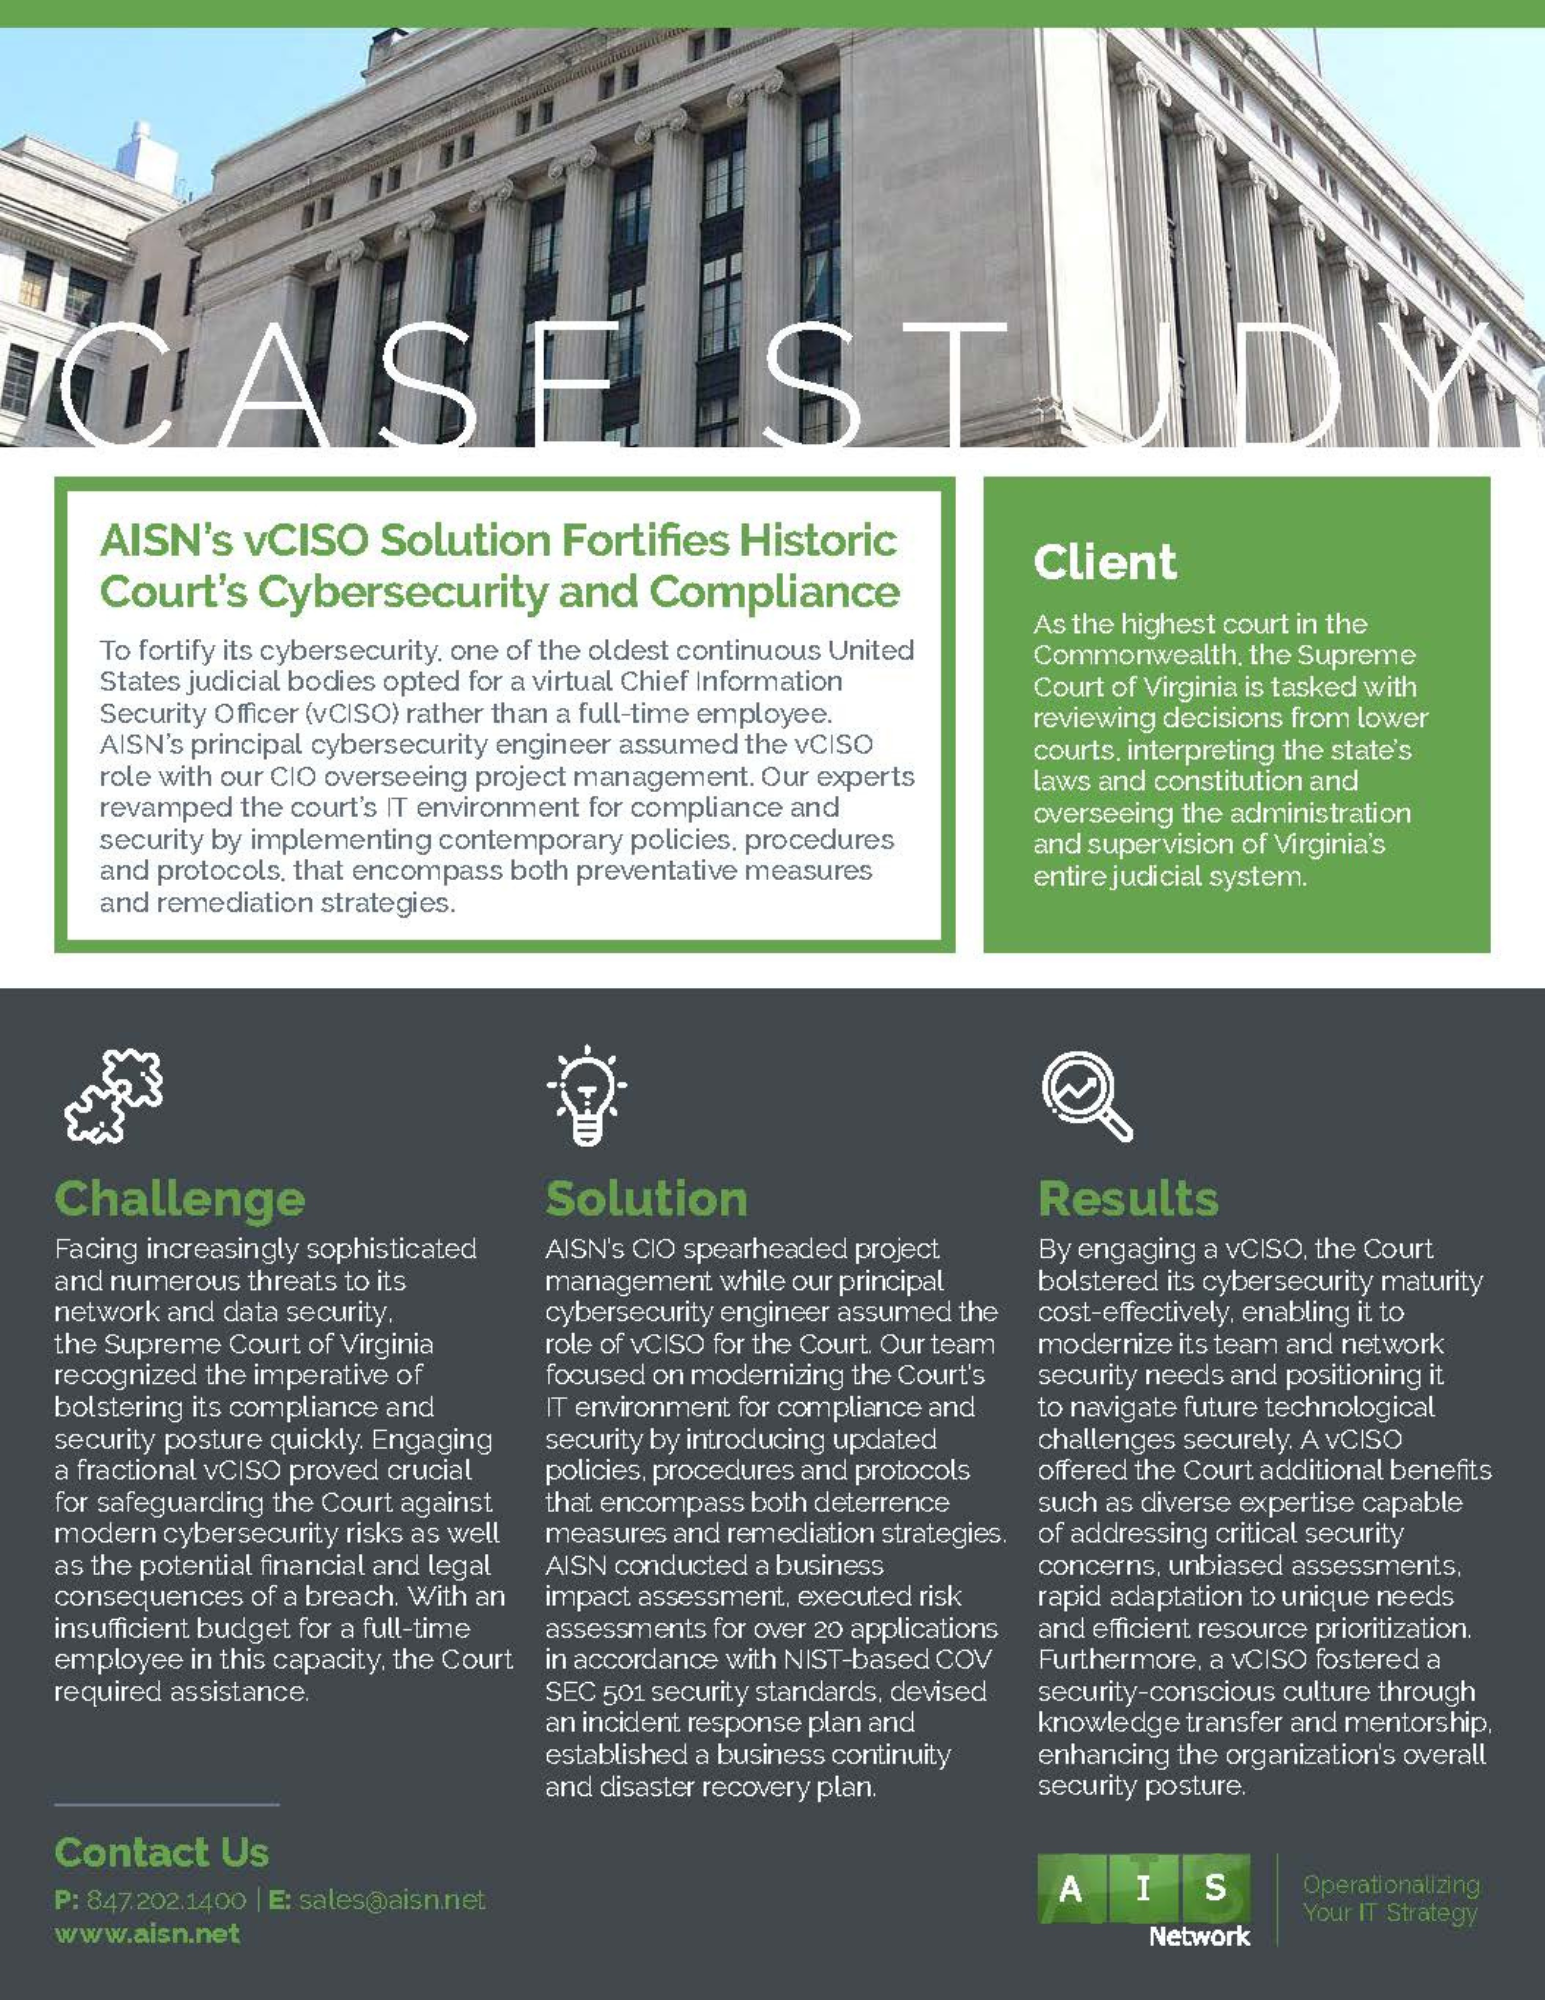 AISN's vCISO Solution Fortifies Historic Court's Cybersecurity and Compliance.